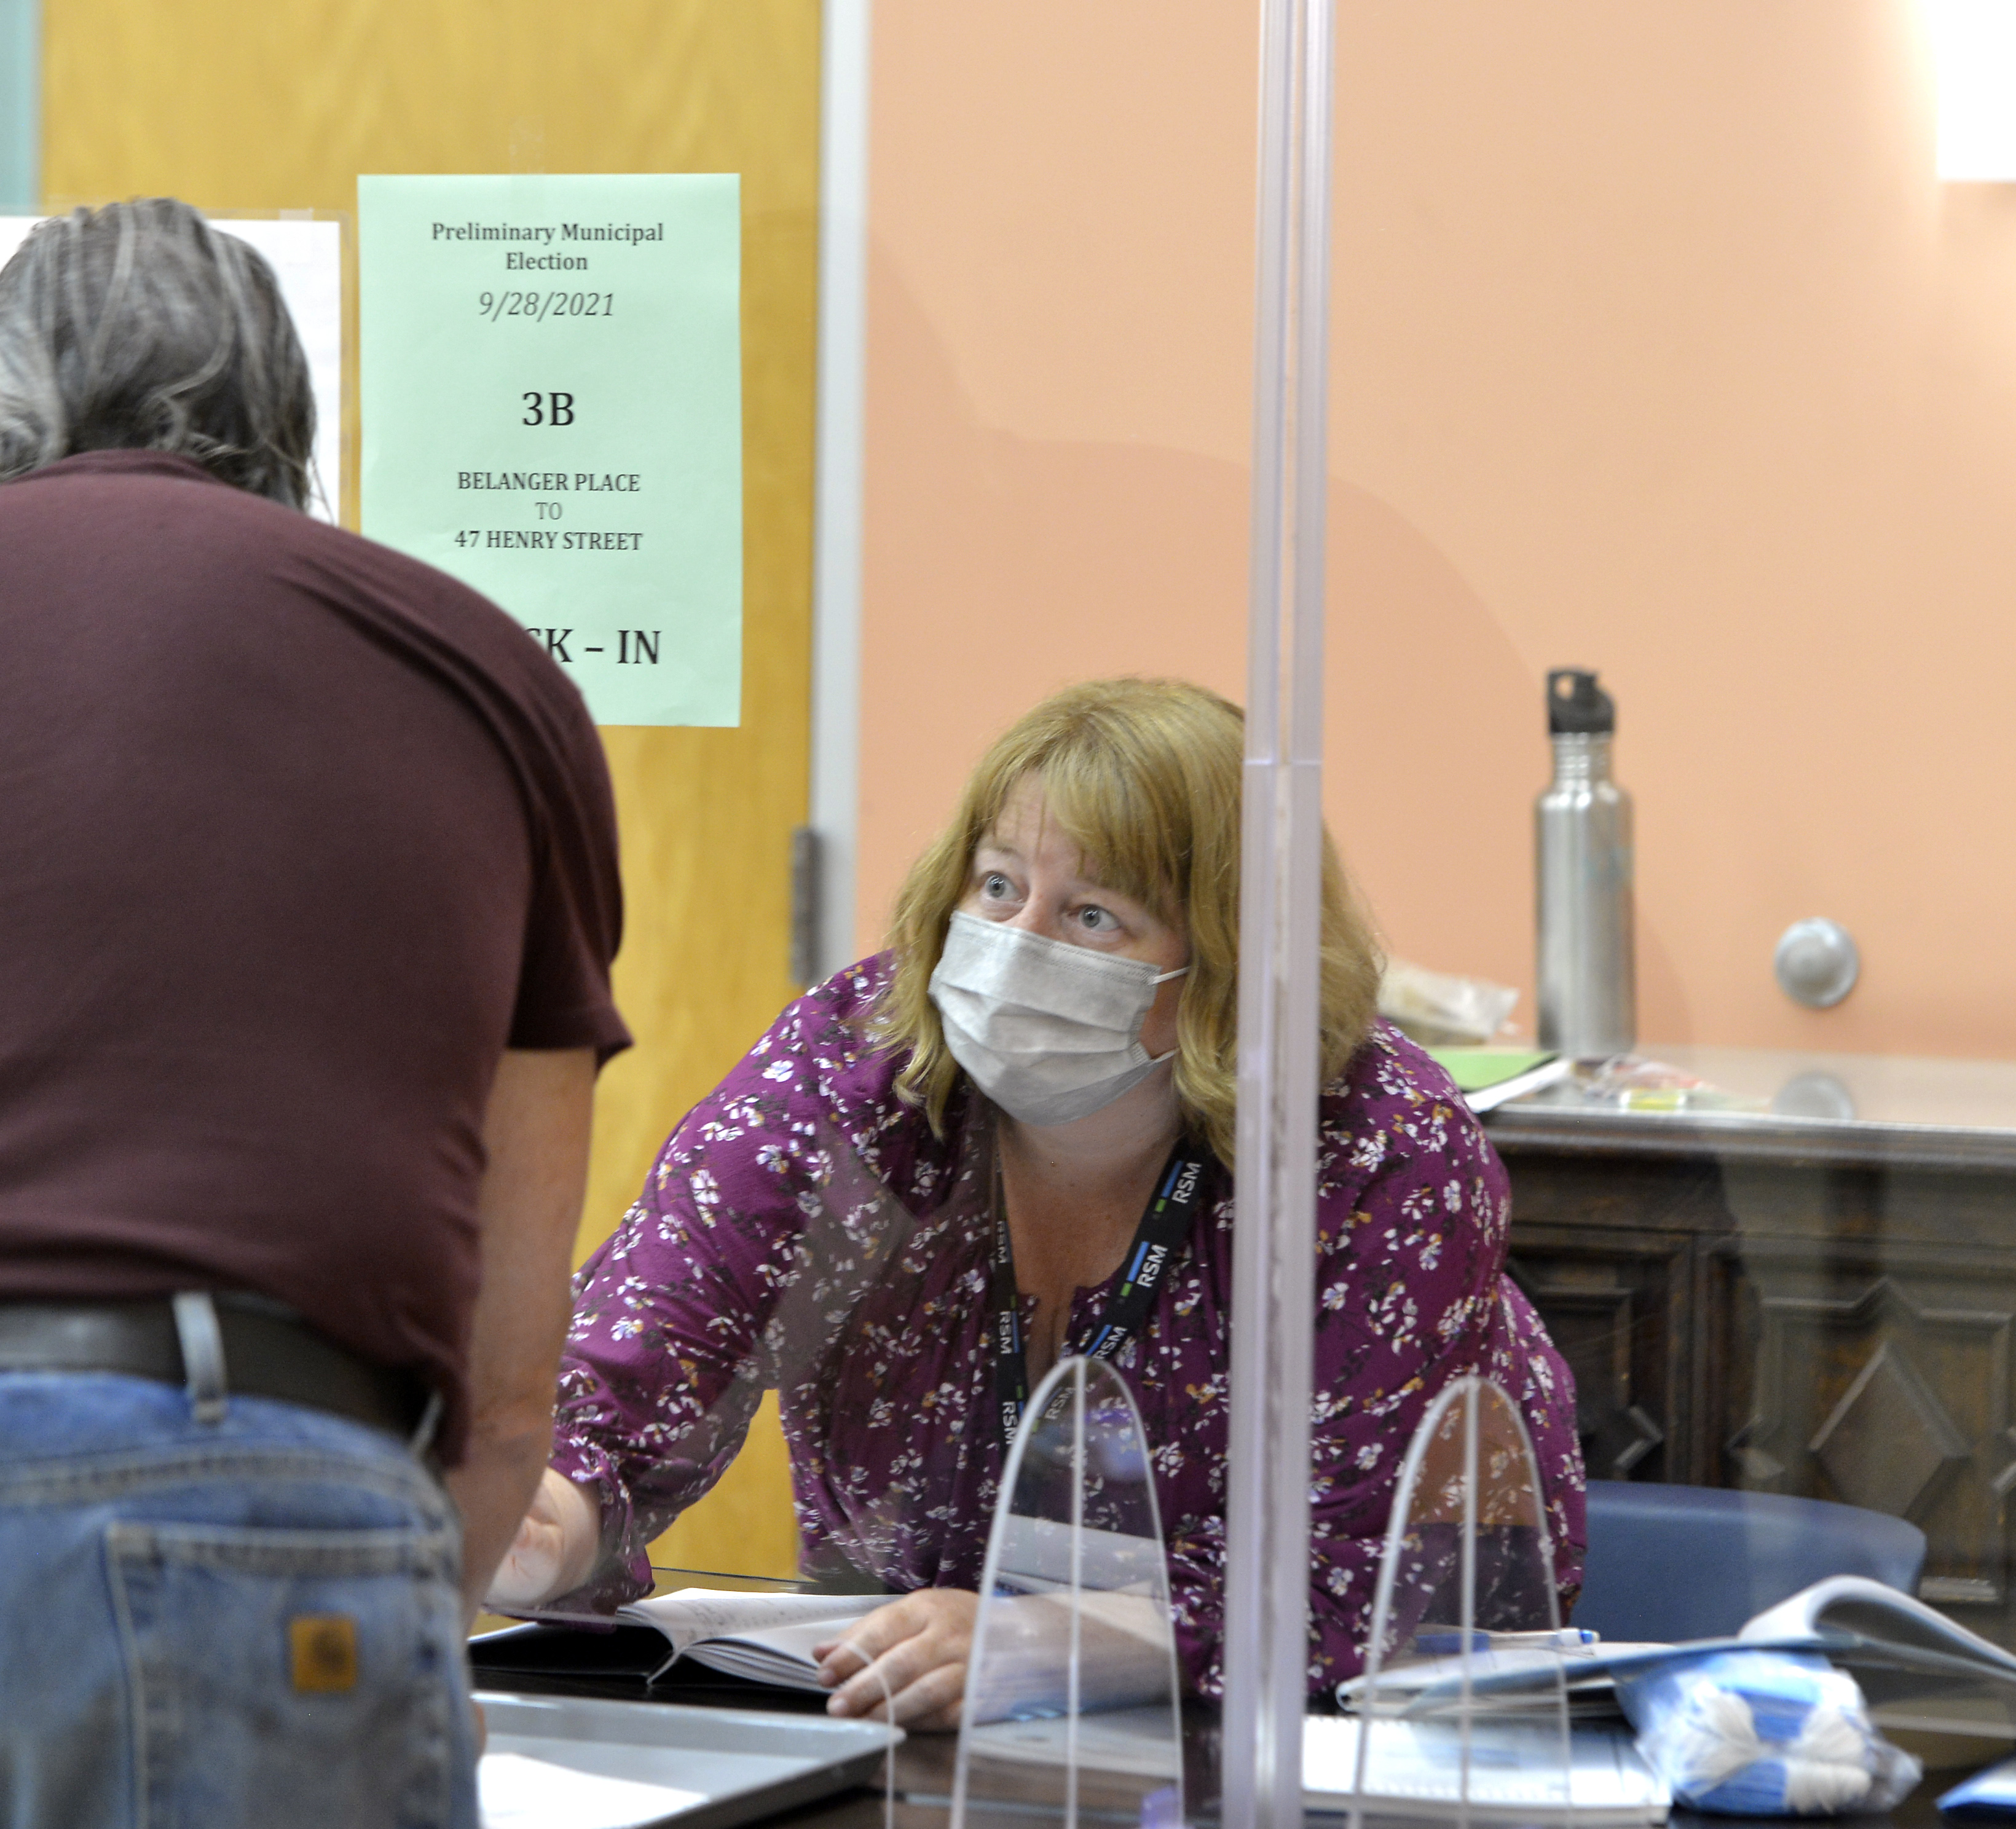 Election worker Jessica Neiswender assists a voter during perliminary election voting at the Northampton Senior Center, Sptember 28, 2021.   (Don Treeger / The Republican)